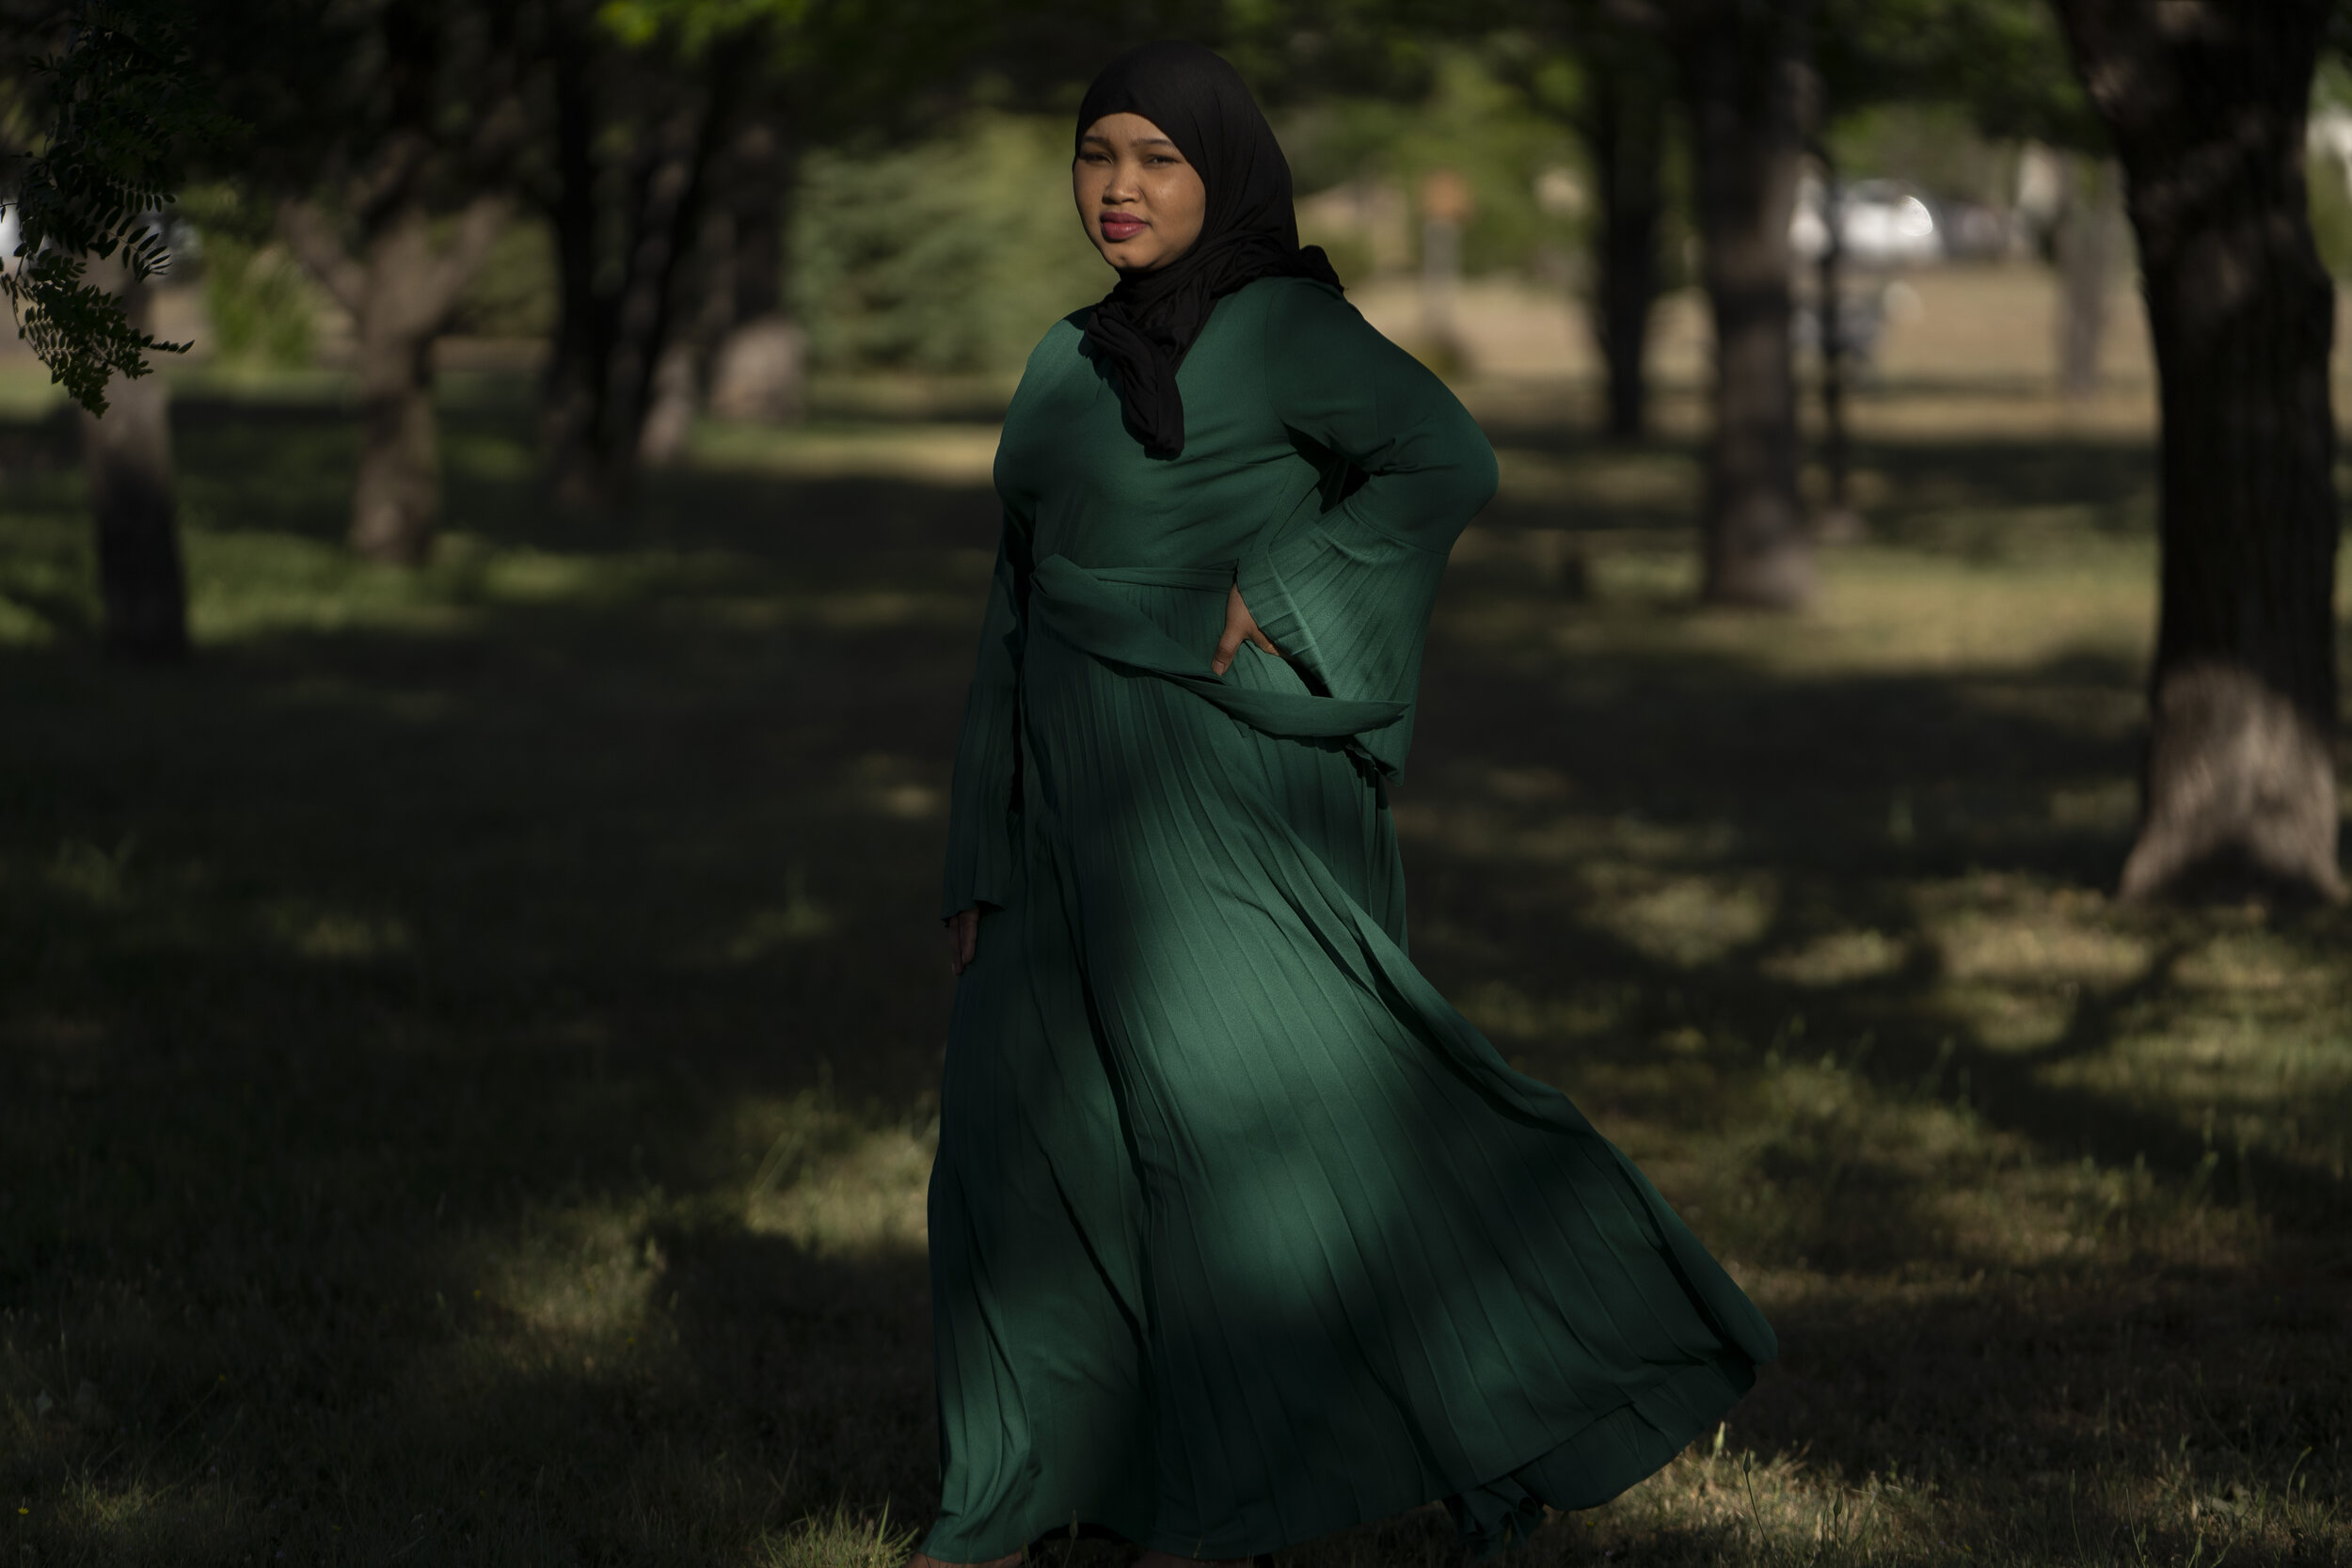  Refugee Roda Rayed poses for a portrait in Amarillo, Texas, May 30, 2020. Nick Oxford for Buzzfeed News 